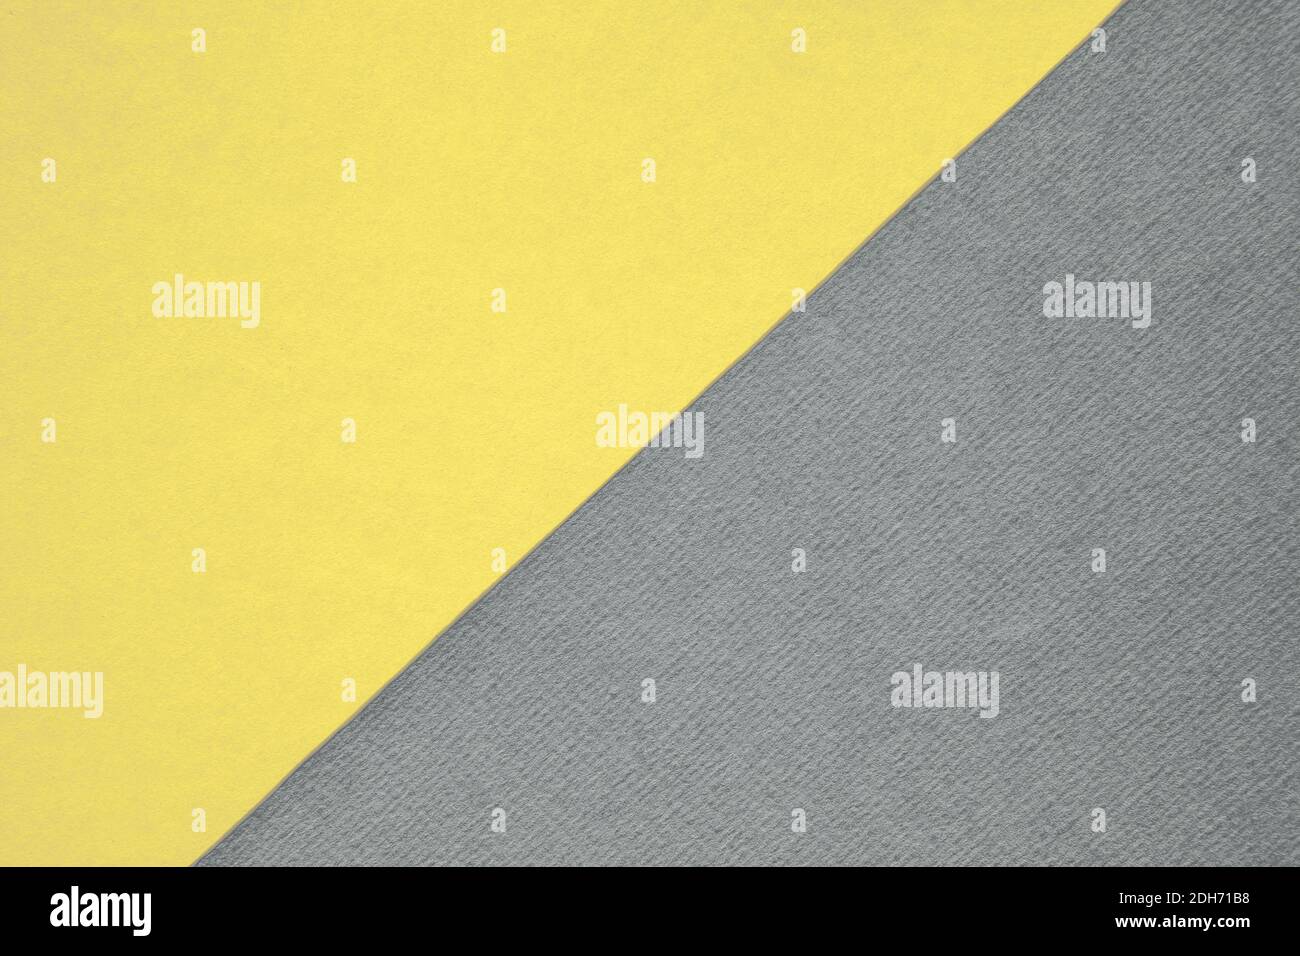 pastel colored yellow and neutral gray abstract duo tone background design Stock Photo